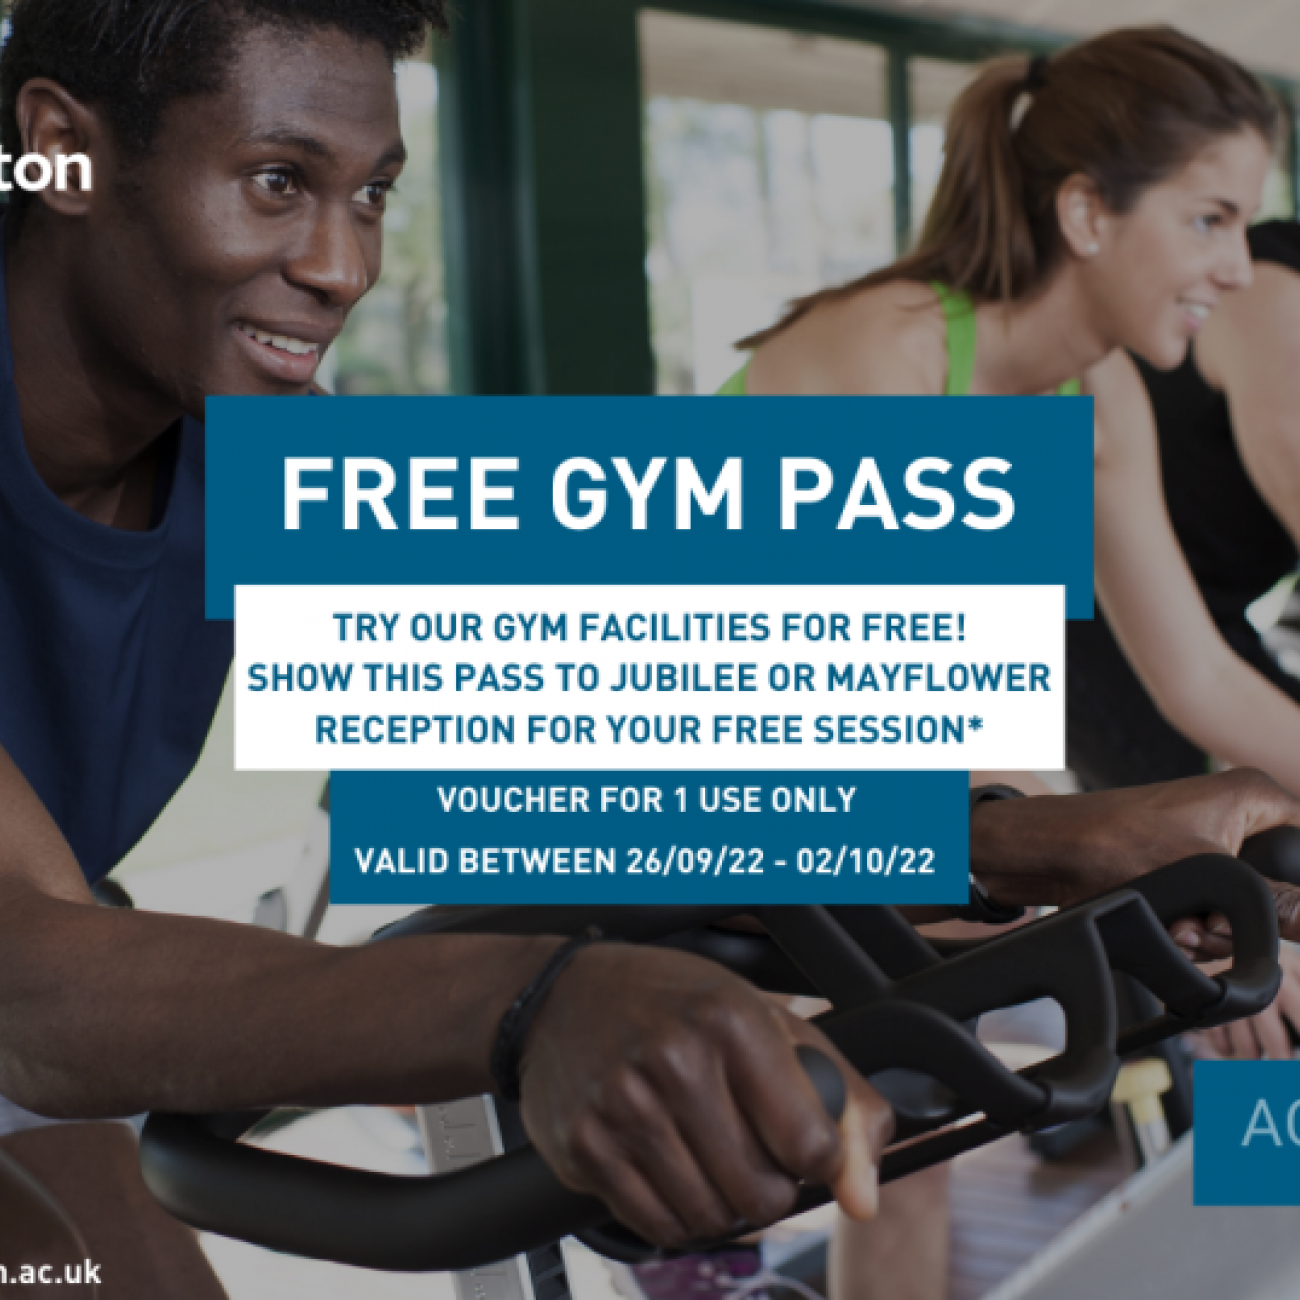 A free gym pass for Jubilee and Mayflower gyms between 26 September and 2 October in 2022